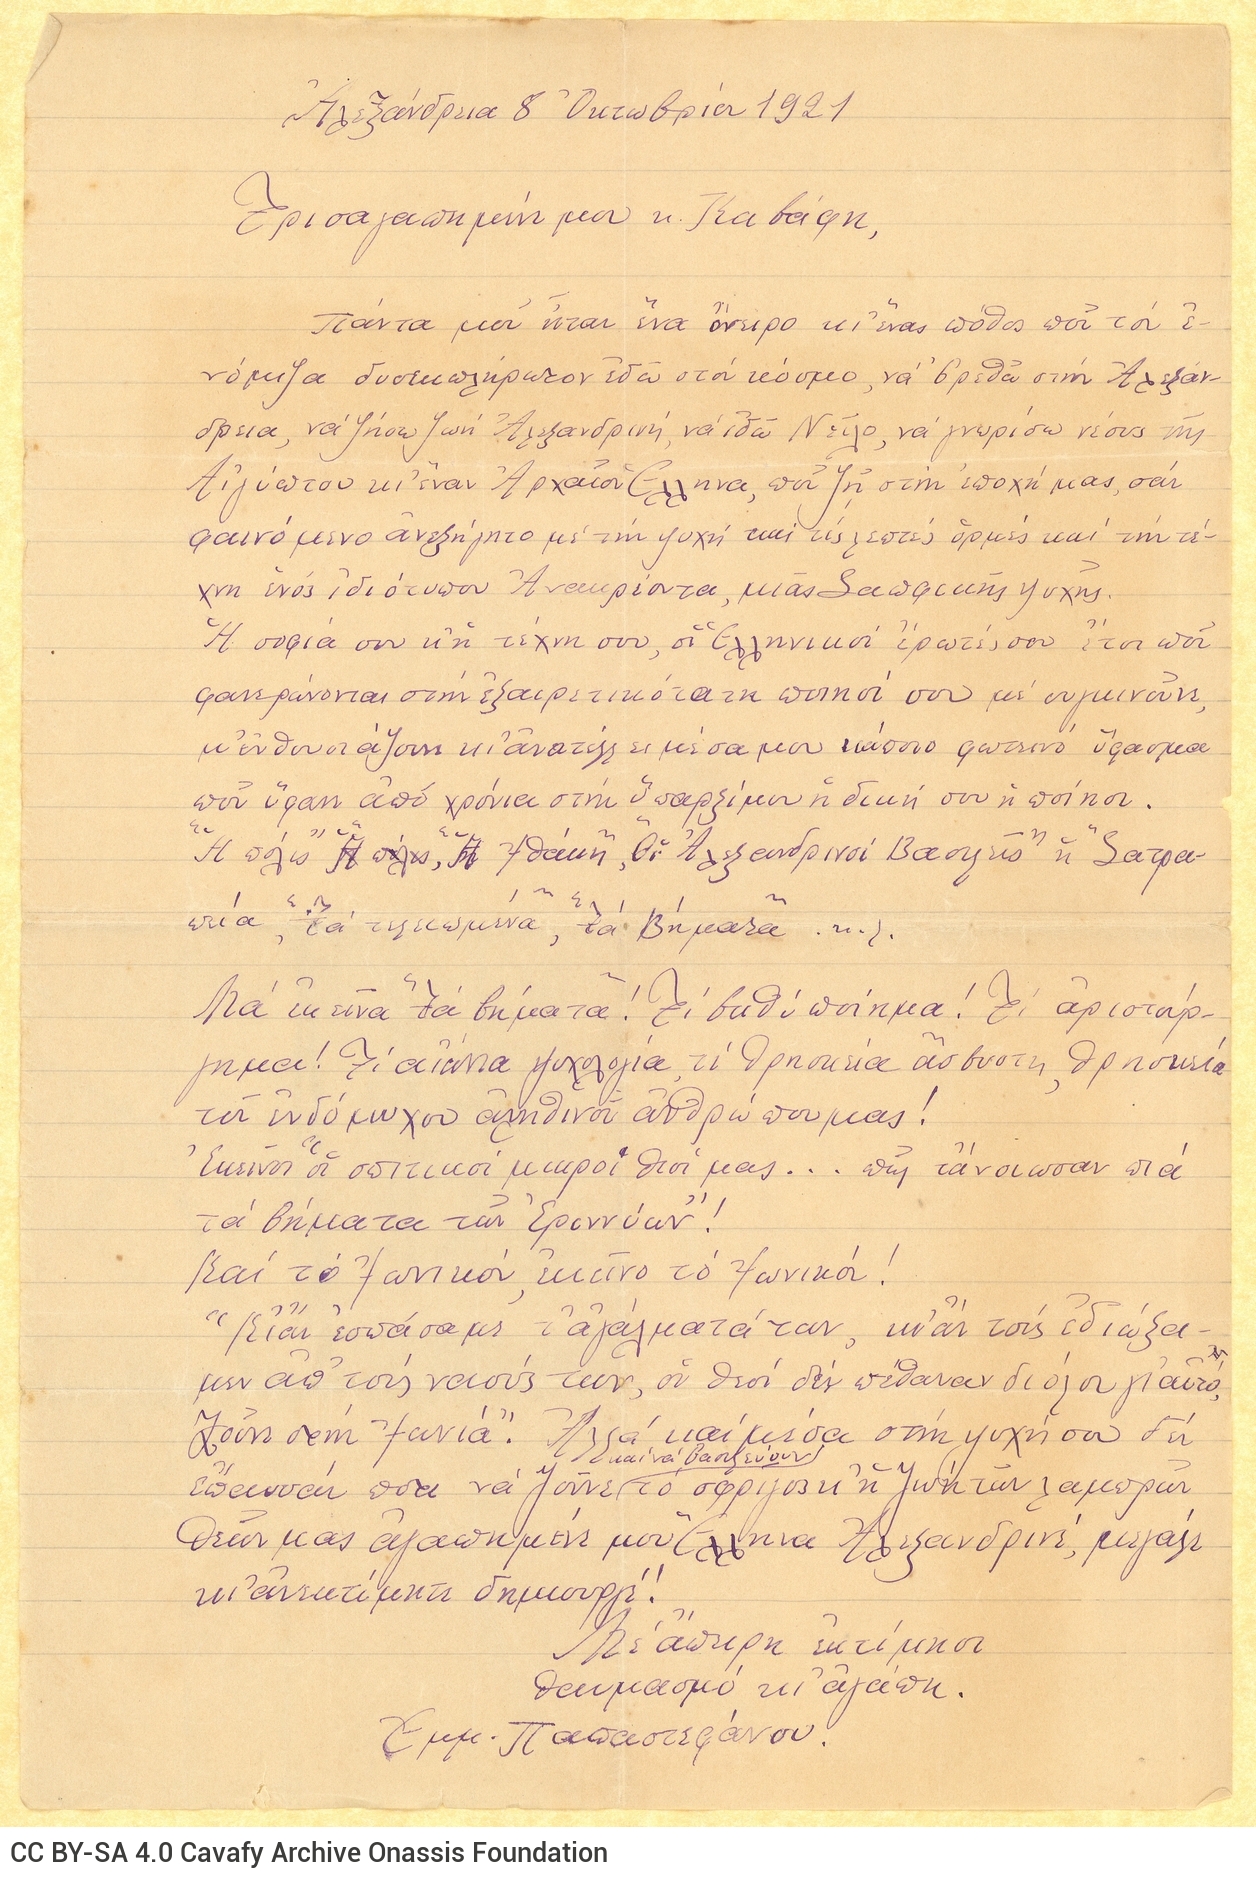 Handwritten letter by Emmanouil Papastefanou to Cavafy, in which he most enthusiastically expresses his admiration for the po